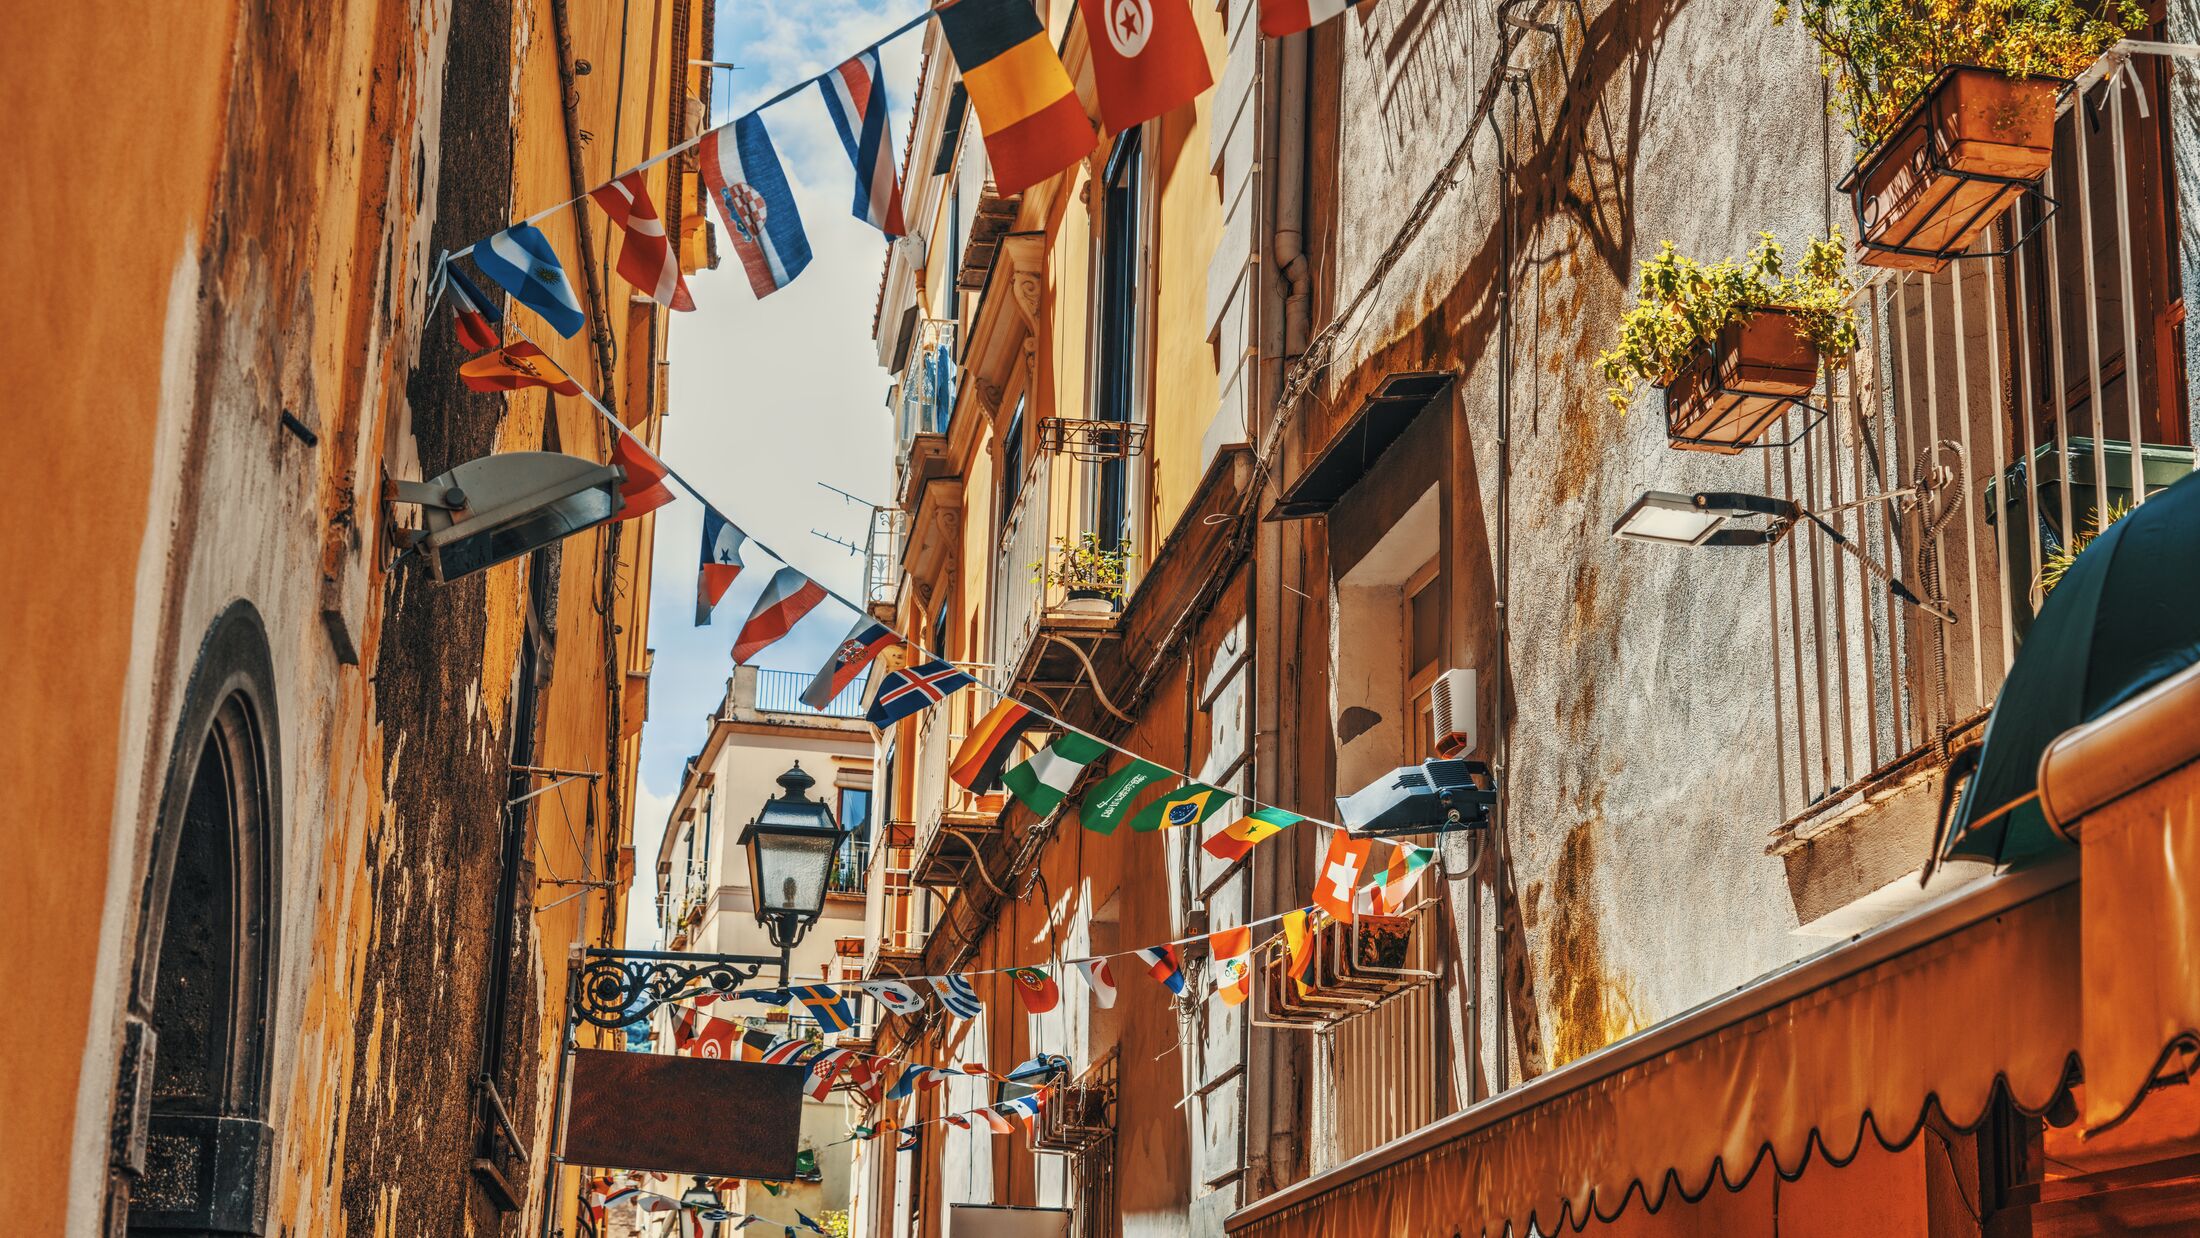 Flags on a narrow alley in old town Sorrento, Italy